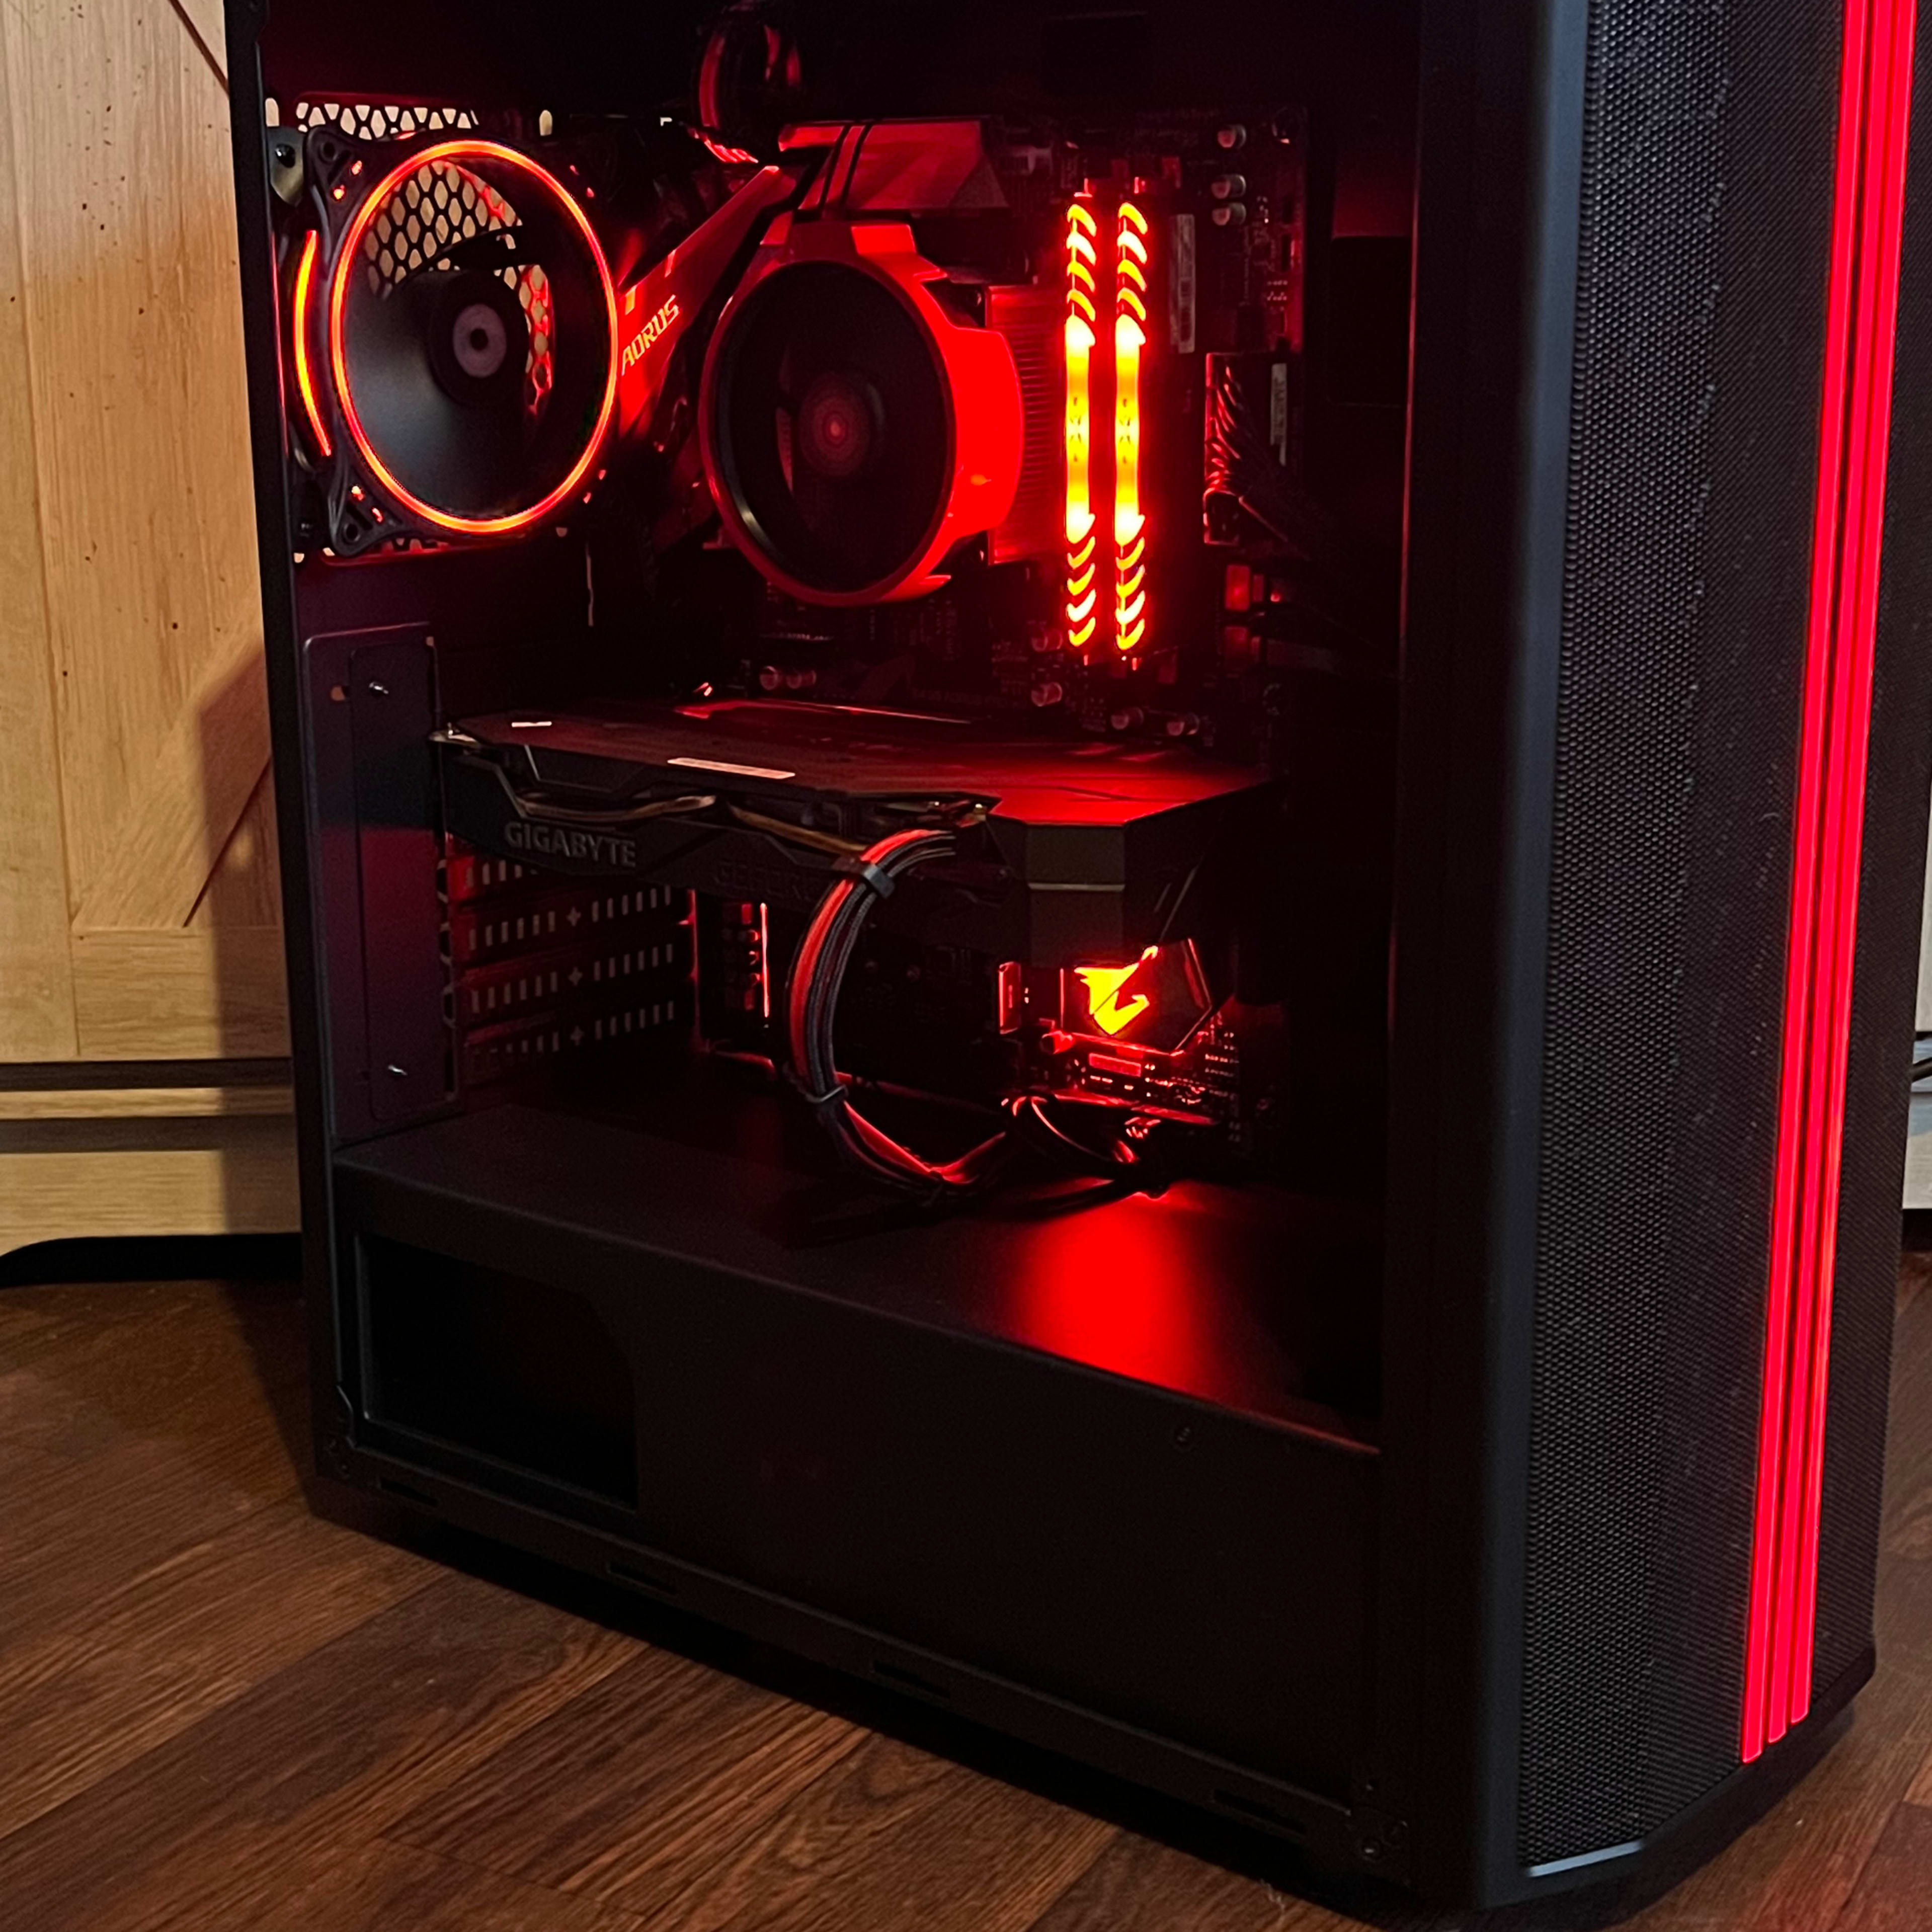 (Diablo) this gaming pc has it all 5600g 4.4gh unlocked for oc and a gigabyte 2070 ray tracing